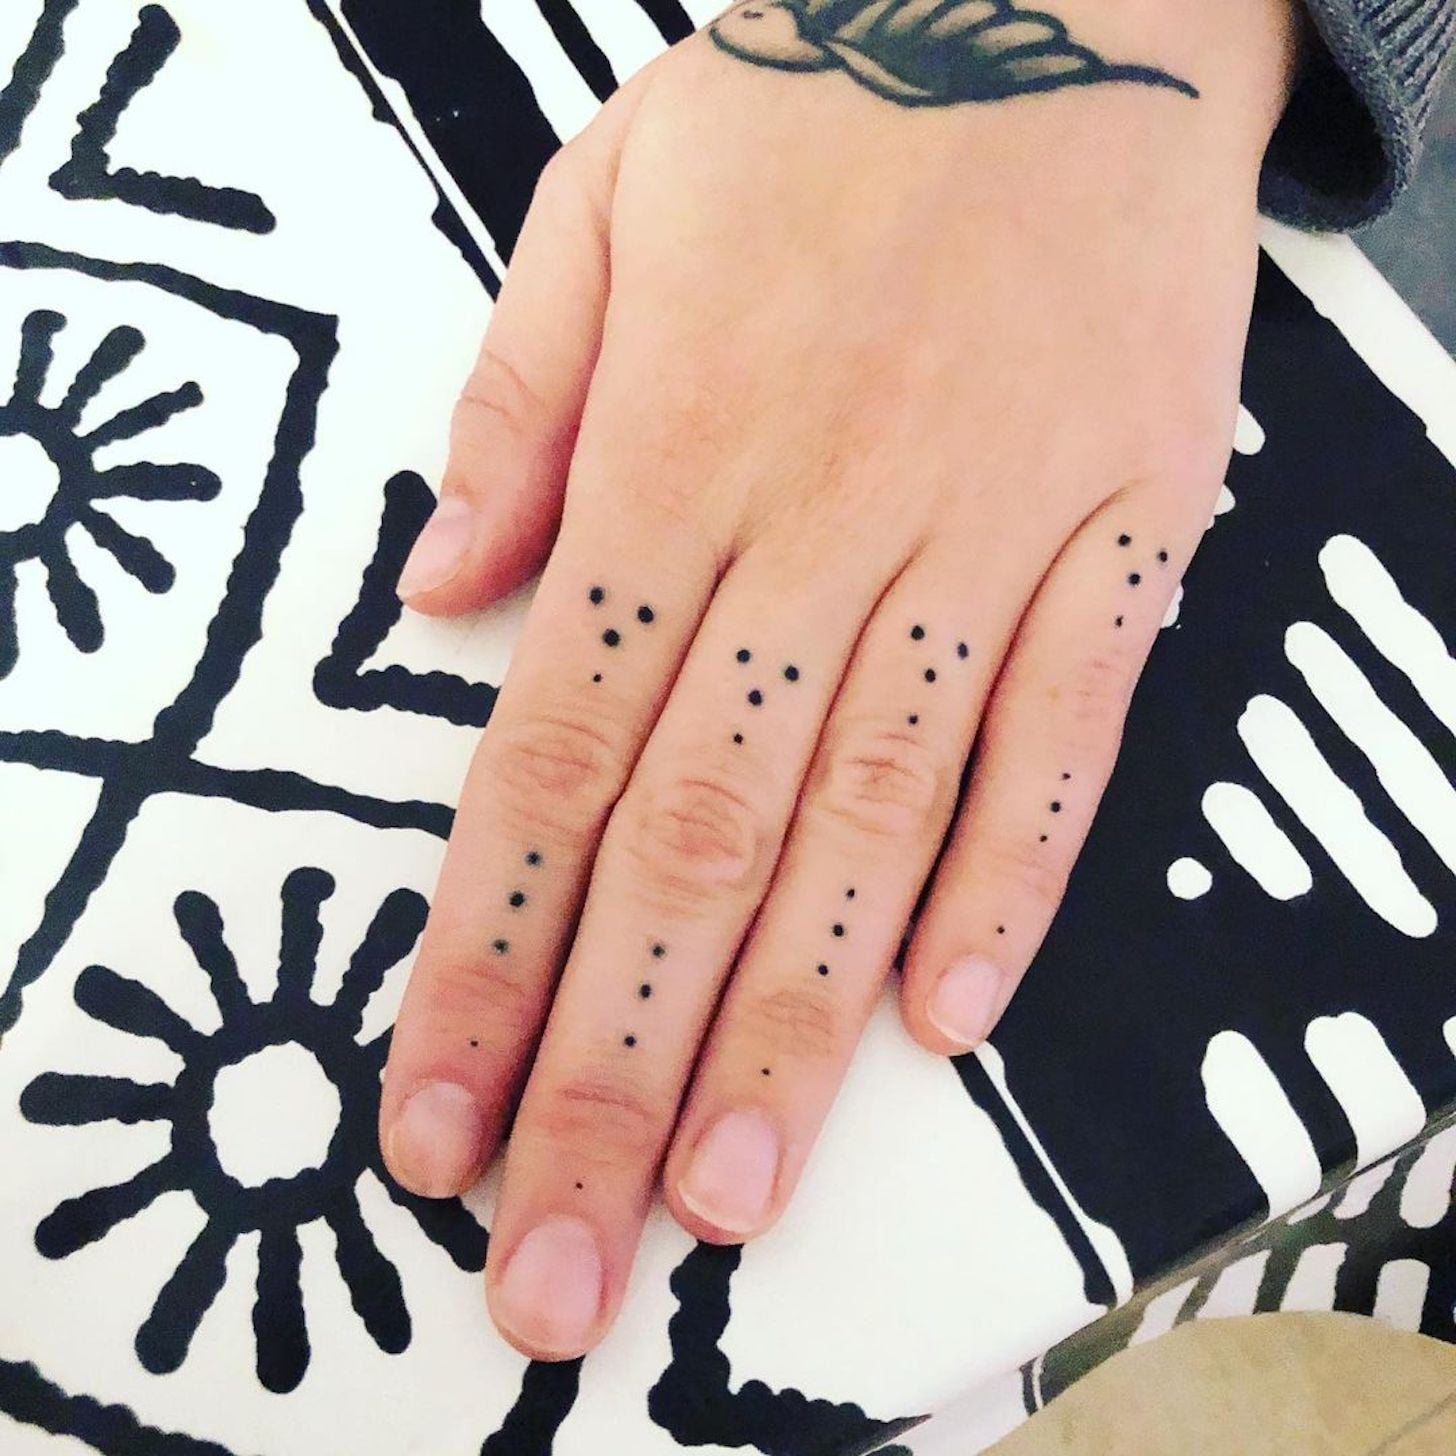 Dot Tattoos  Explore Interesting Ideas and Different Styles  Certified  Tattoo Studios